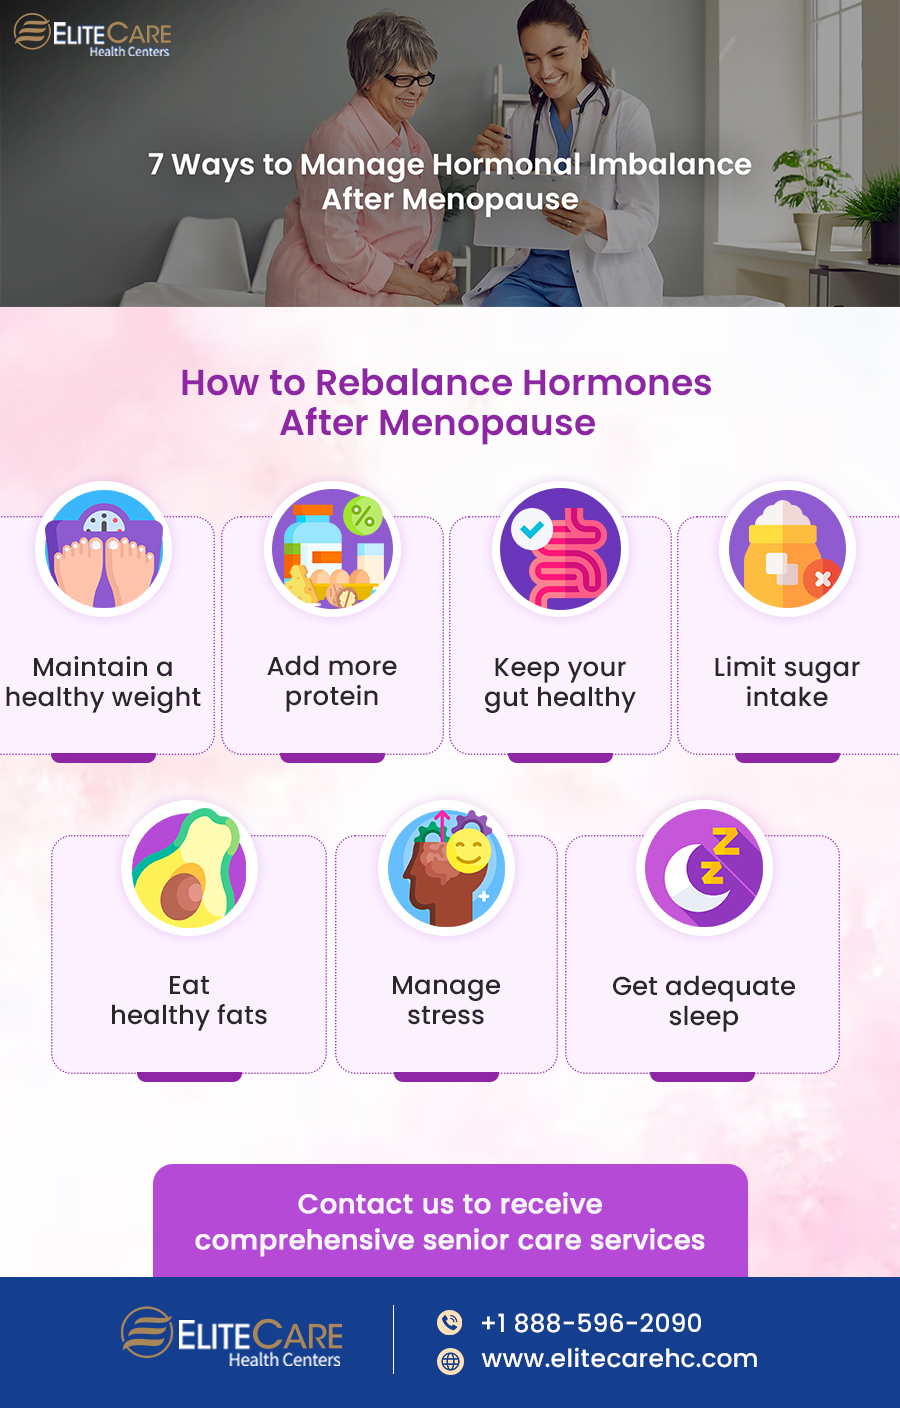 7 Ways to Manage Hormonal Imbalance After Menopause | Infographic